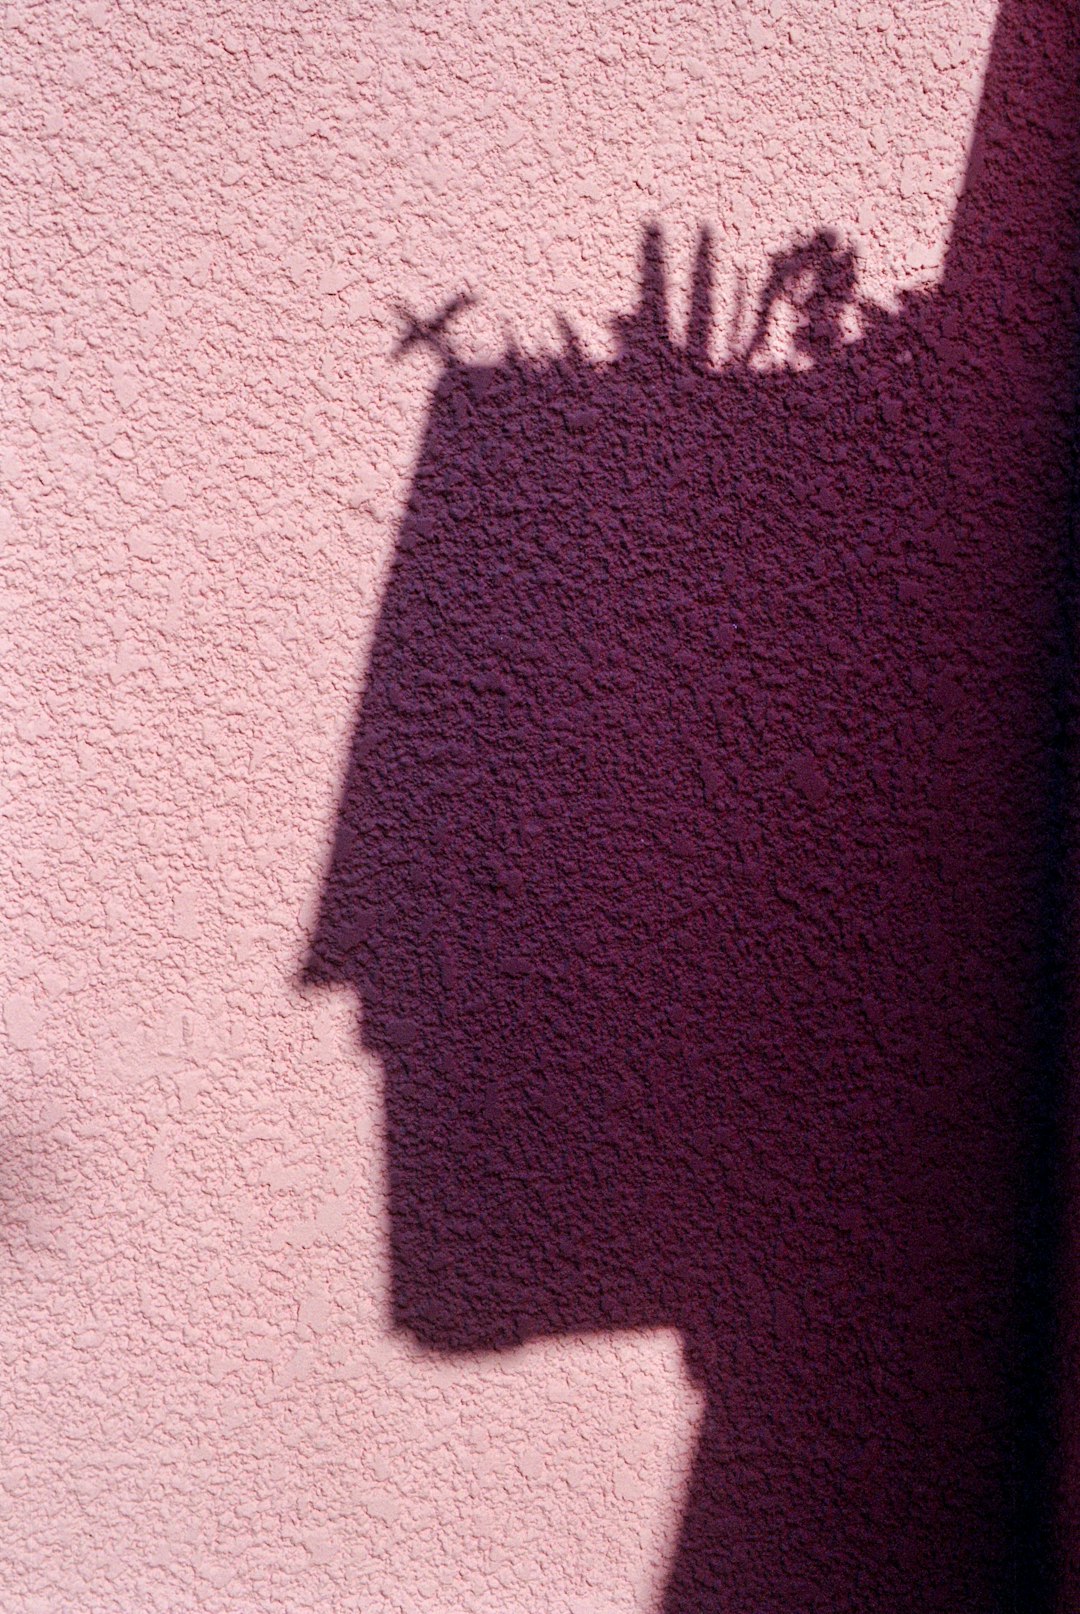 shadow of person on red concrete wall